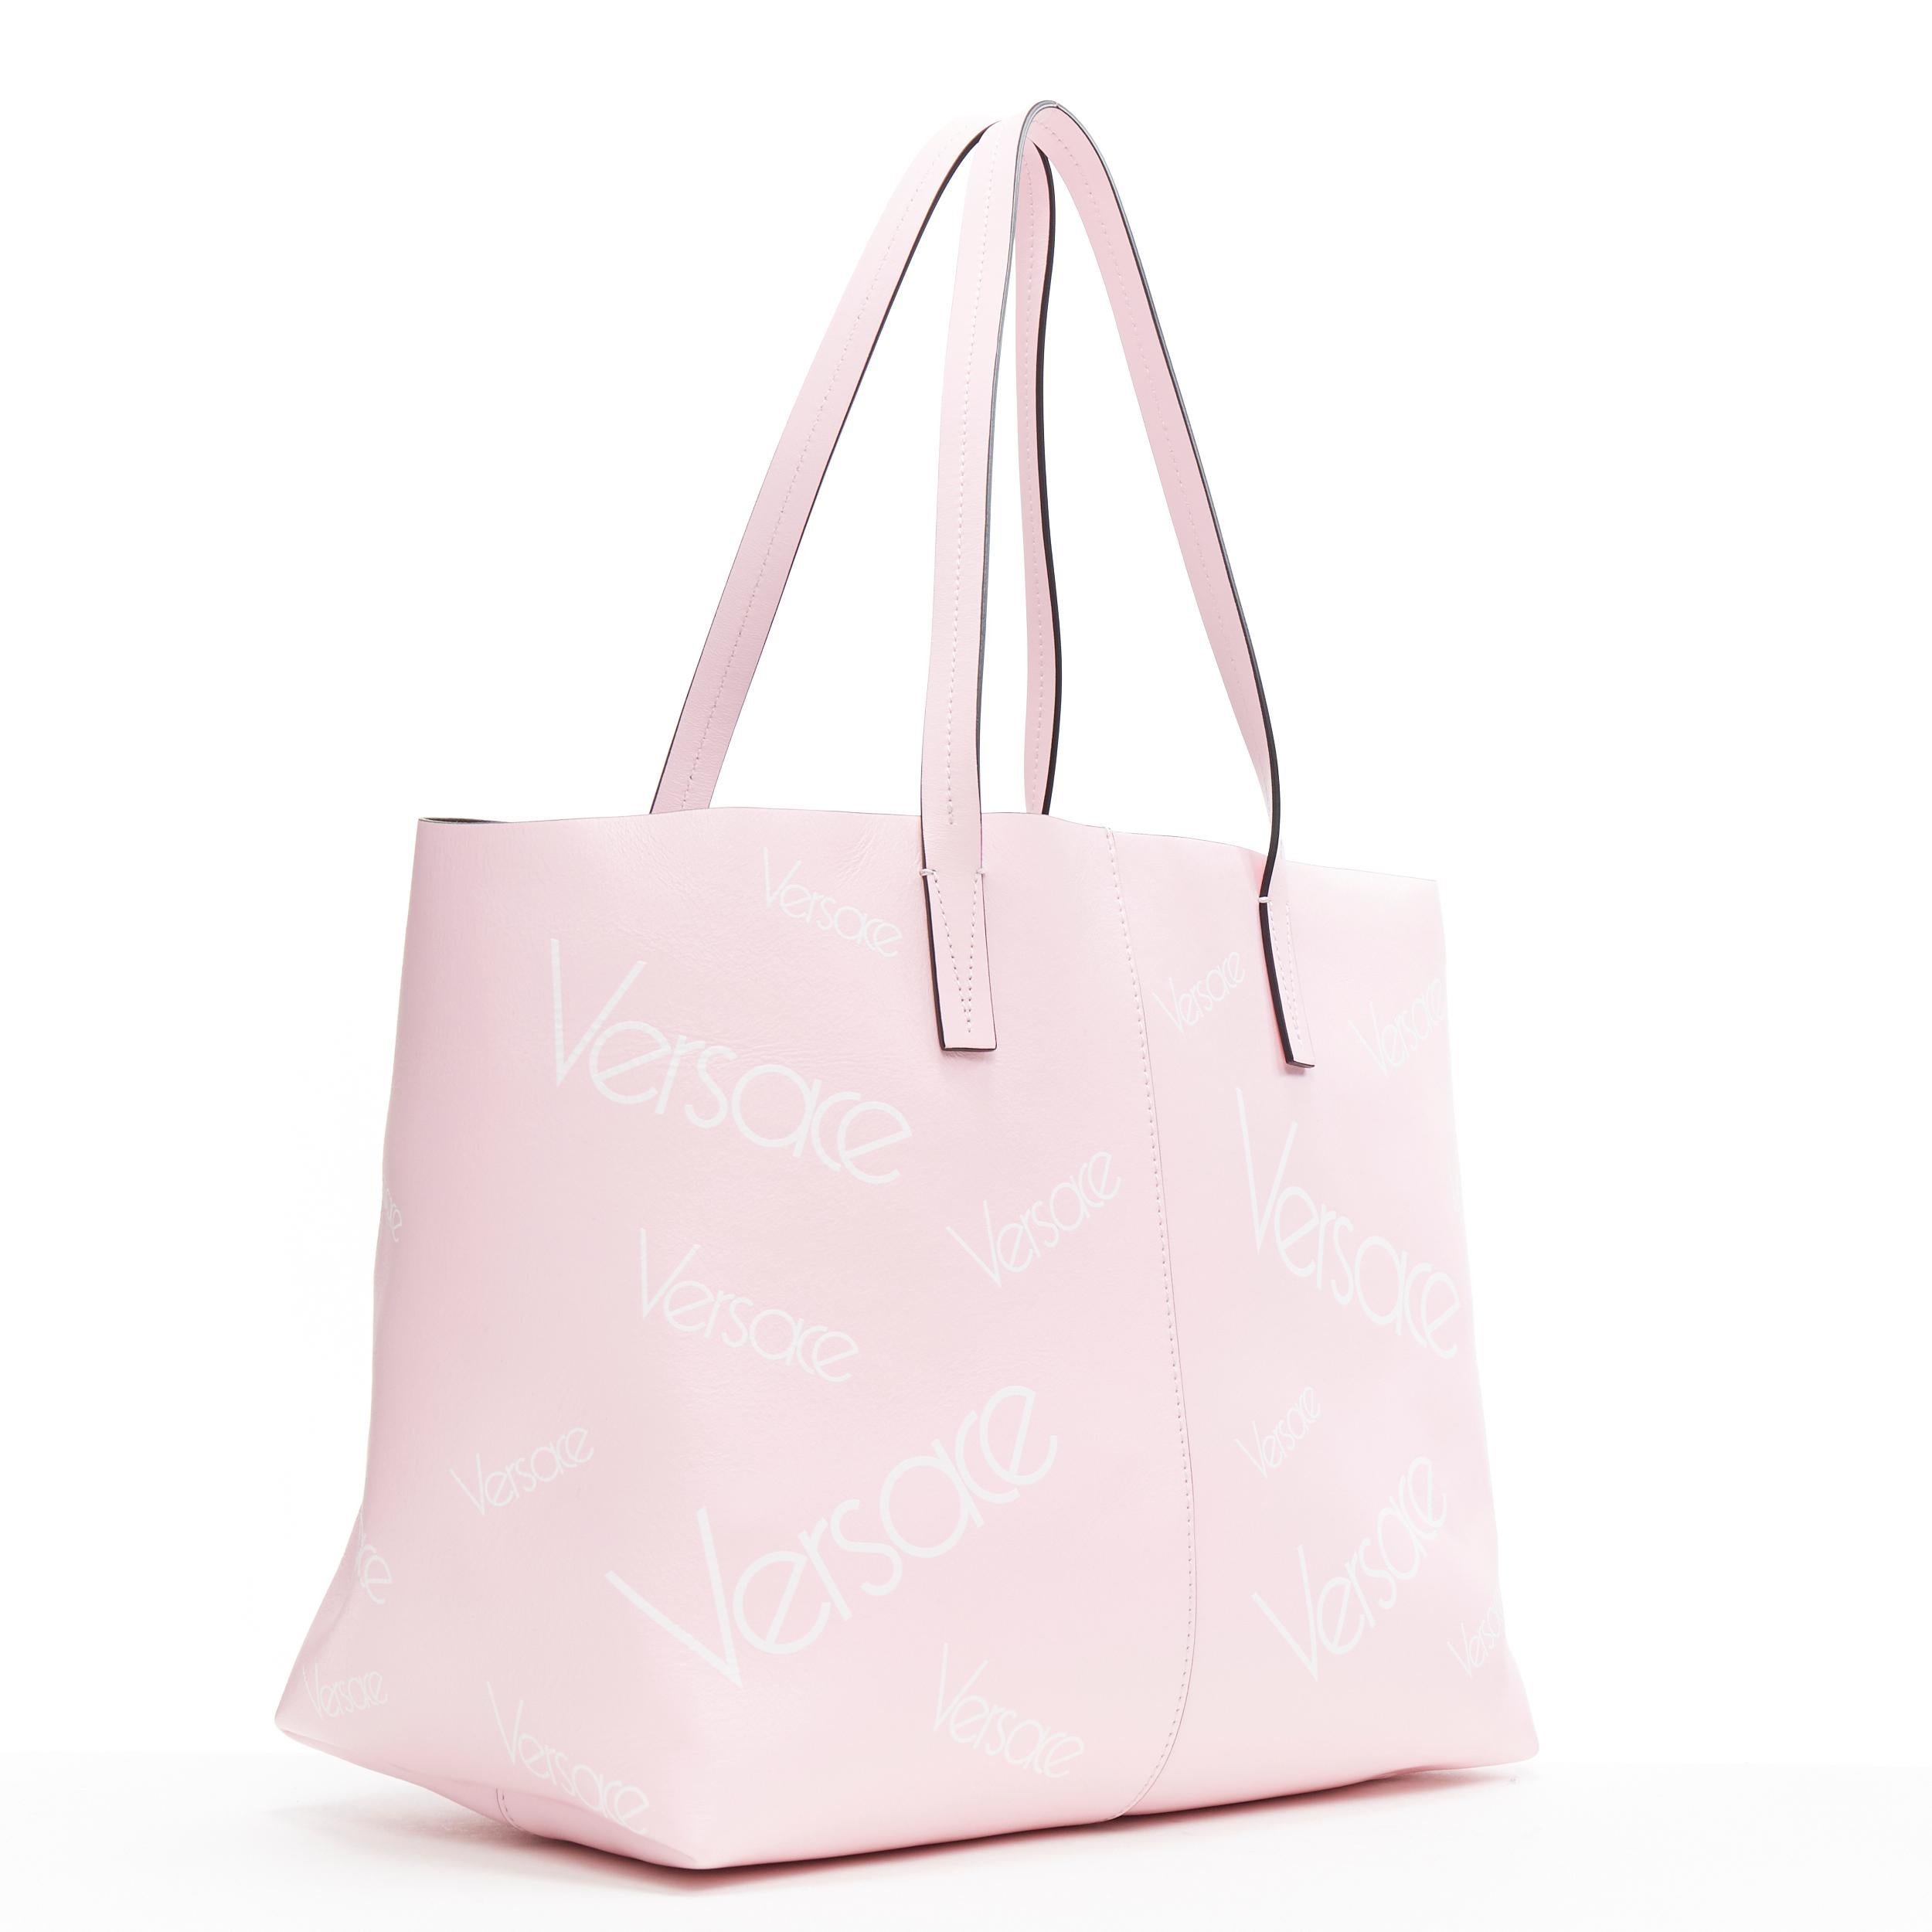 new VERSACE smooth calf leather light pink 90's logomania monogram printed tote
Brand: Versace
Designer: Donatella Versace
Collection: Spring Summer 2018
Model Name / Style: Leather tote
Material: Leather
Color: Pink
Pattern: Other; logomania
Extra